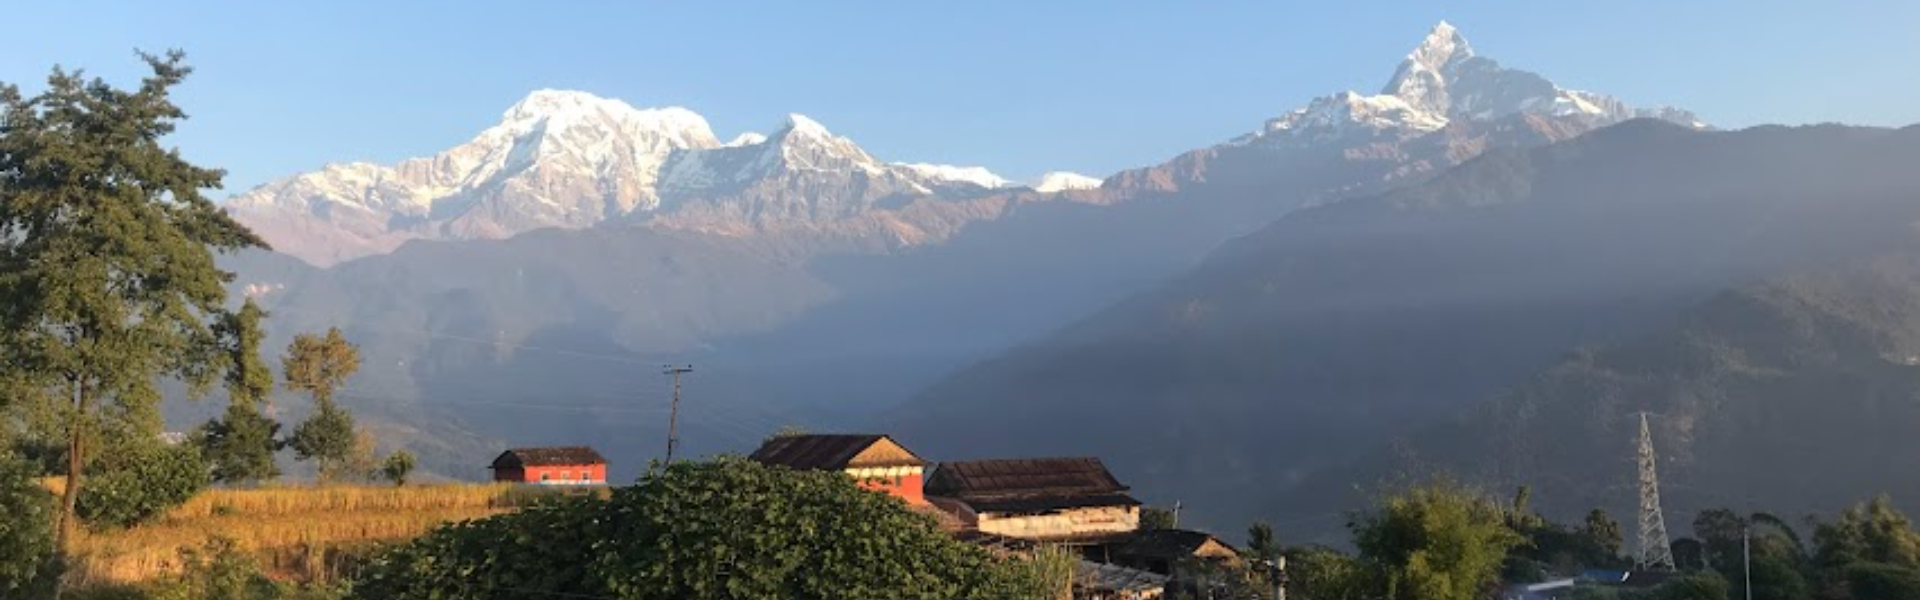 Day Hikes In Pokhara